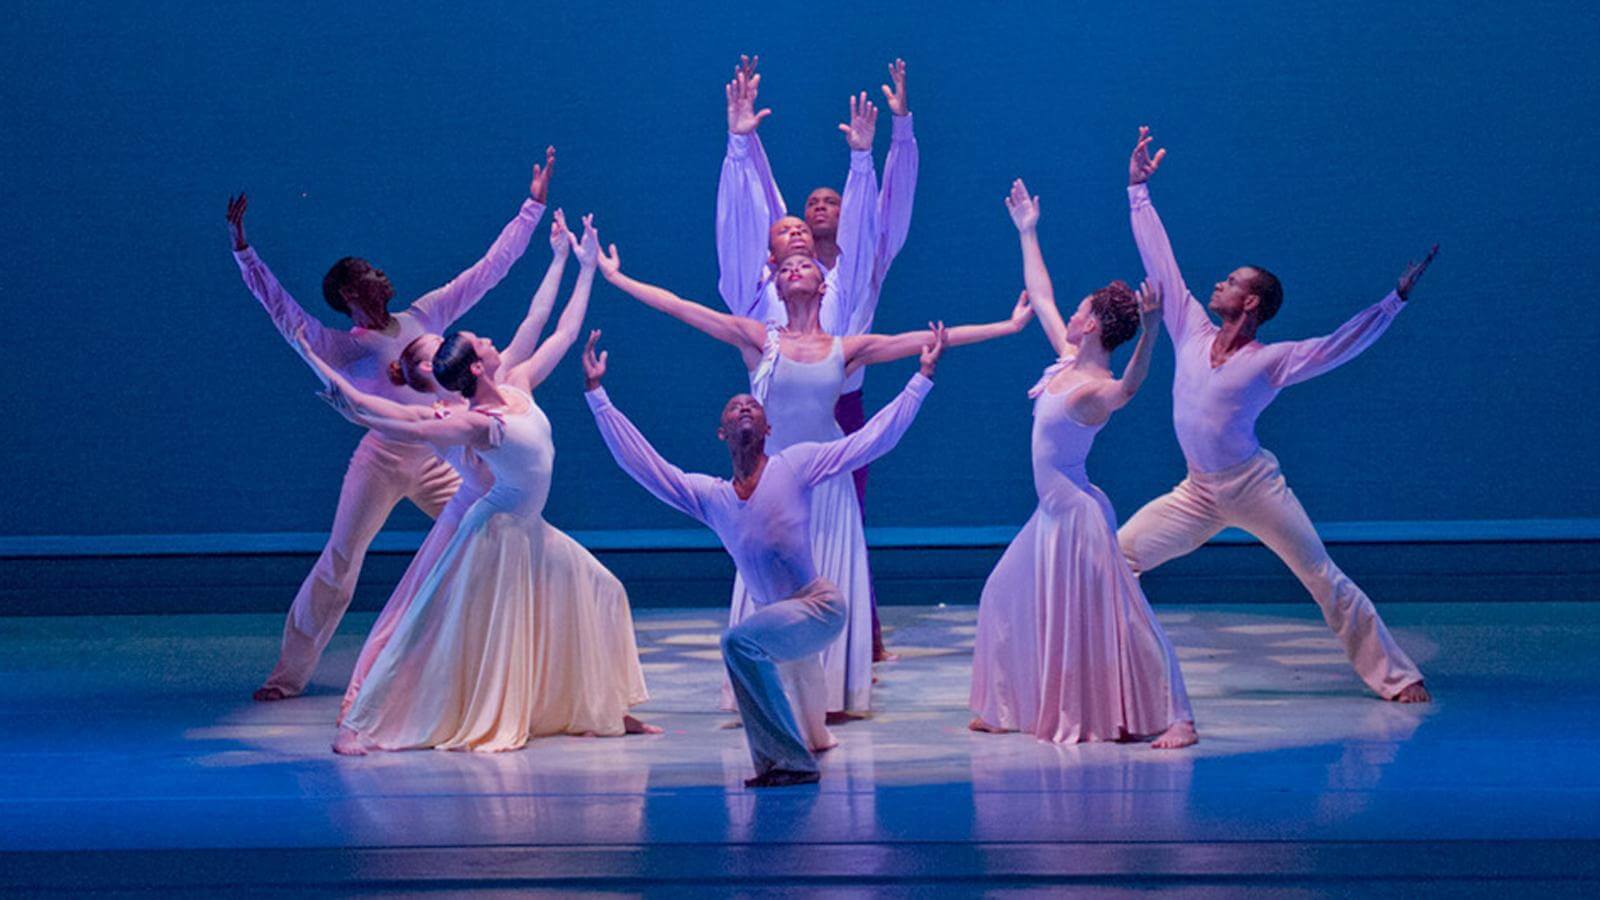 Members of Alvin Ailey American Dance Theater in Alvin Ailey's 'Memoria'. Photo by Steve Wilson.